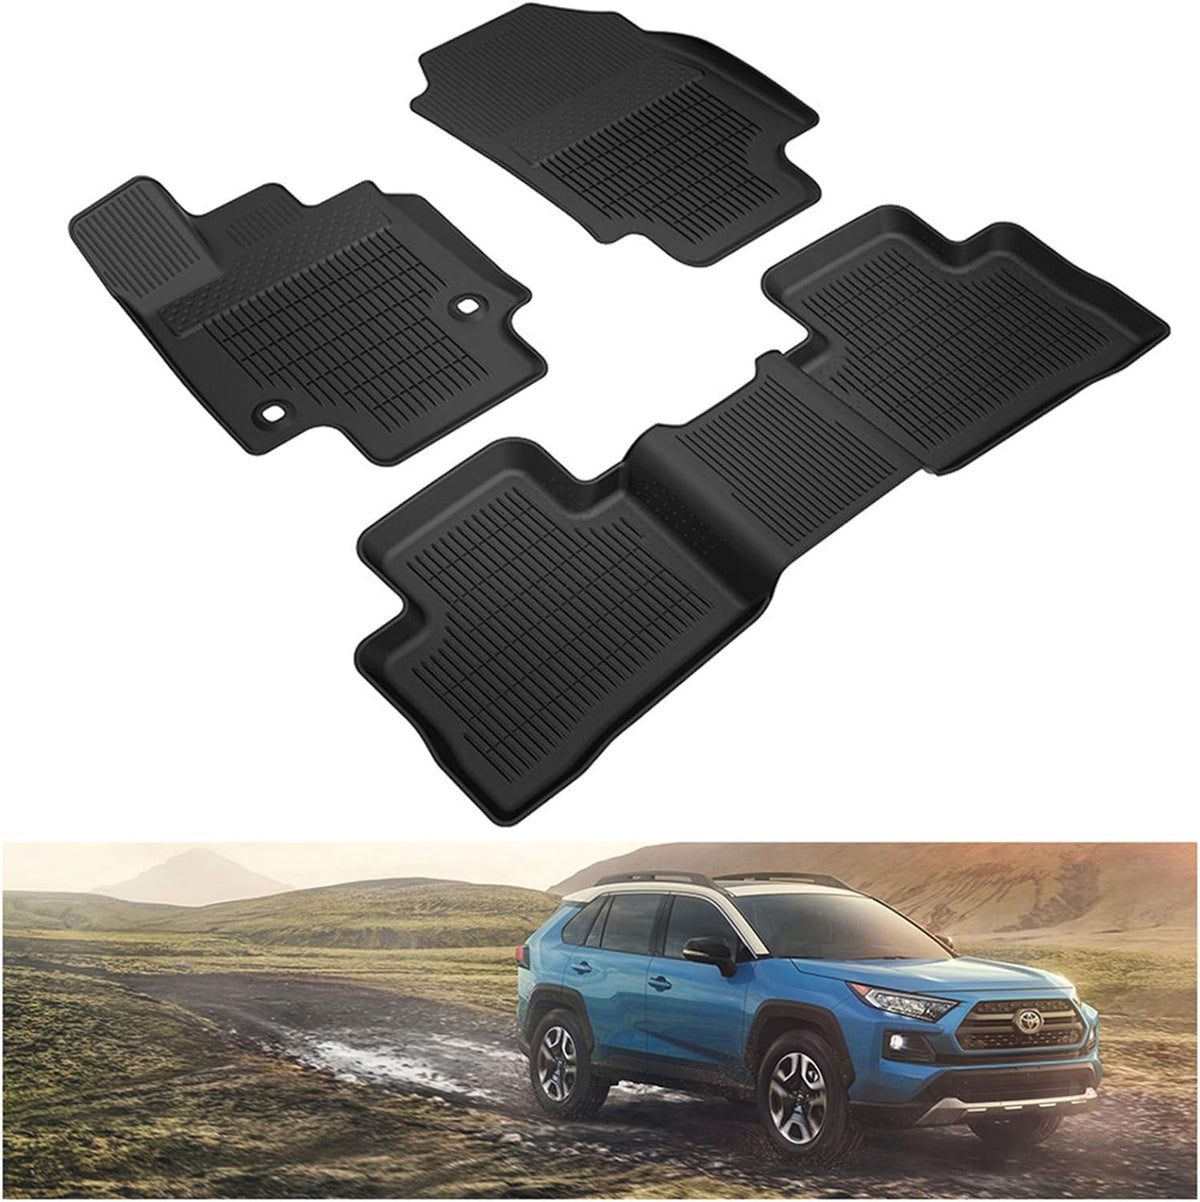 KIWI MASTER Floor Mats Compatible for 2019-2022 Toyota RAV4 All Models Accessories All Weather Protector Mat Liners Front Rear 2 Row Seat TPE Slush Liner Black PT908-42190-02